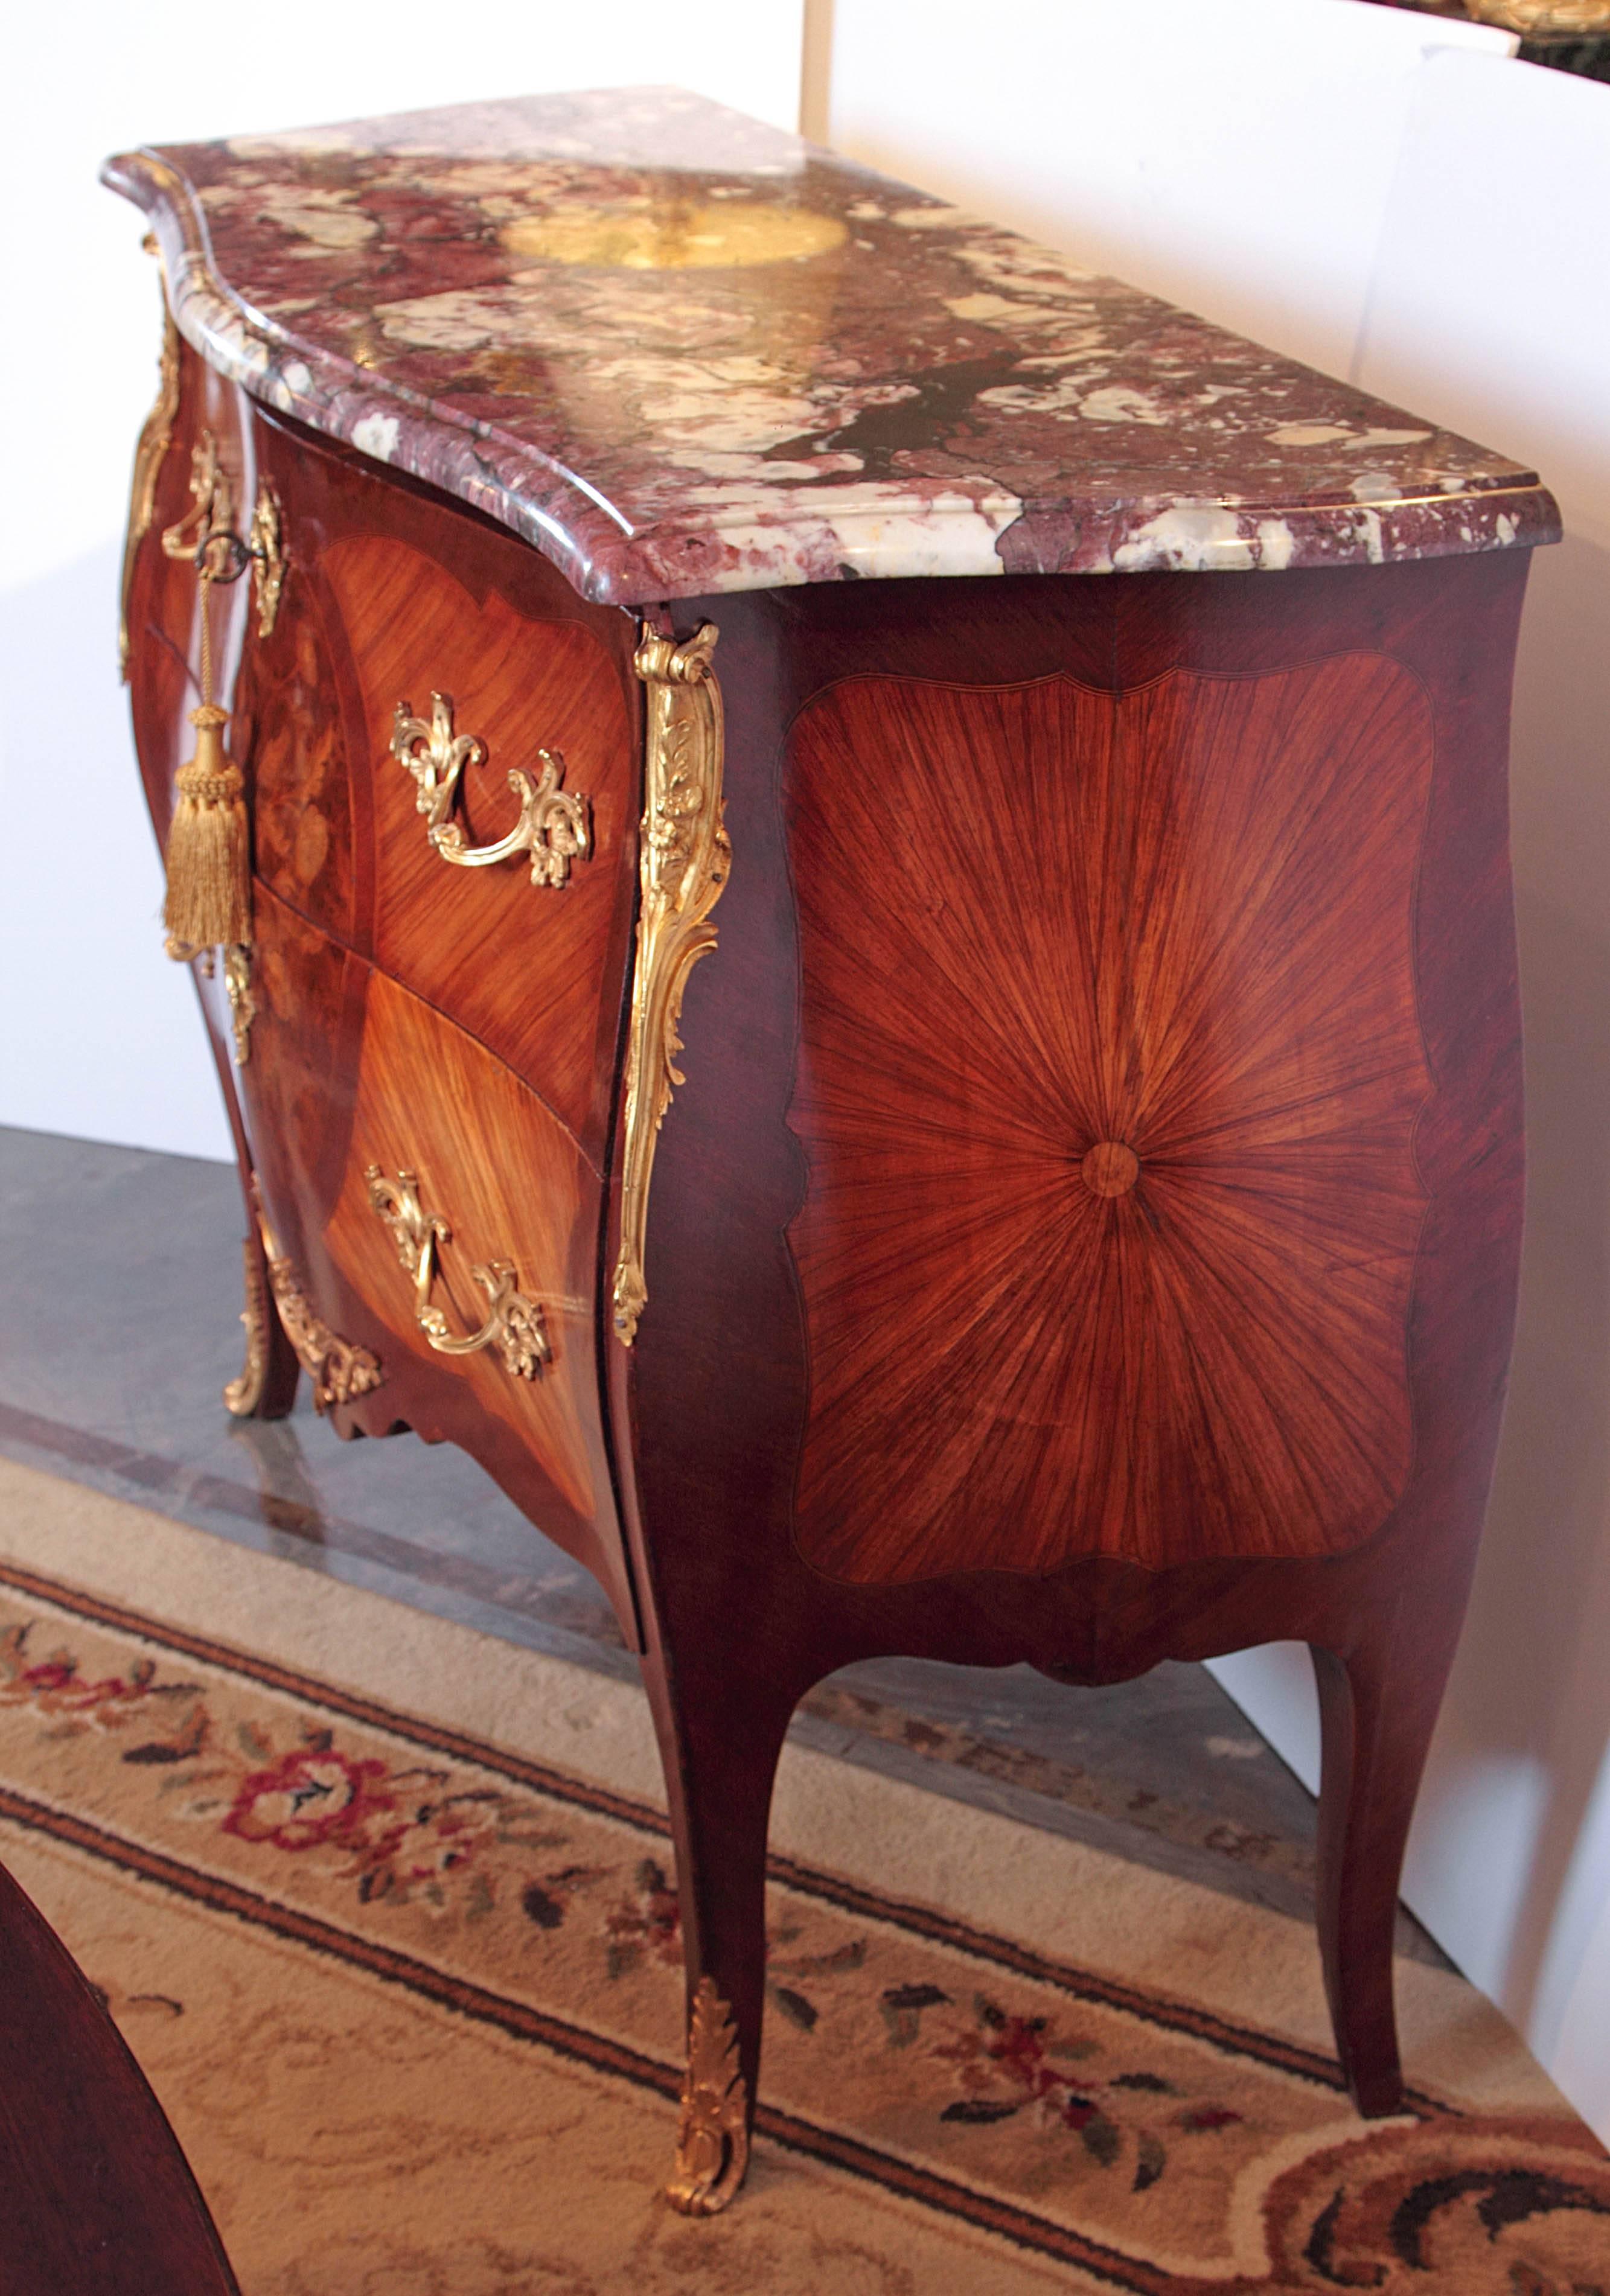 Pair of Beautiful 19th c  French Louis XV mahogany and kingwood marble top commodes with satinwood inlay and marquetry design. Gilt bronze mounts 

